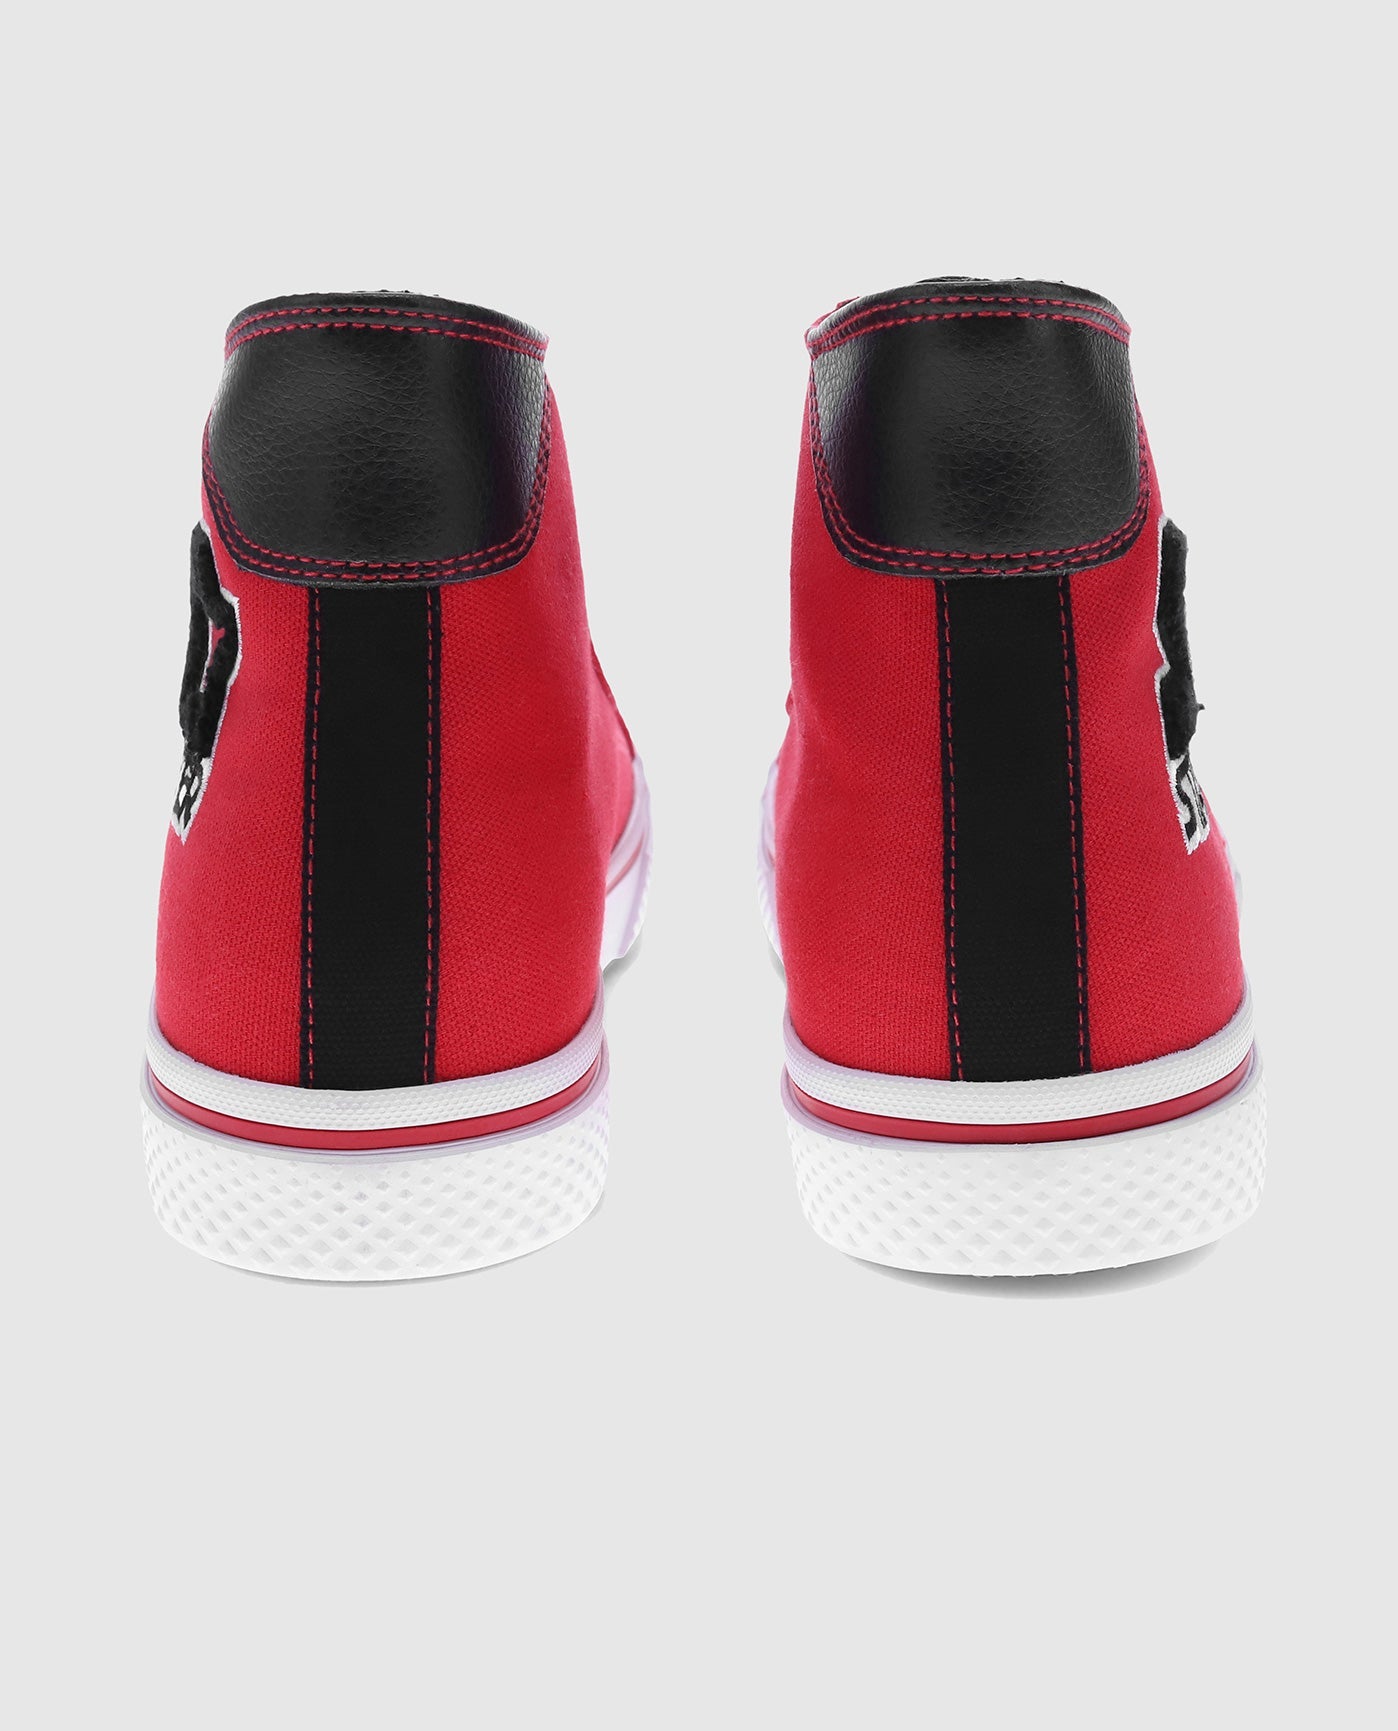 Back Of Starter Tradition 71 High Red Sneaker Pair | Red